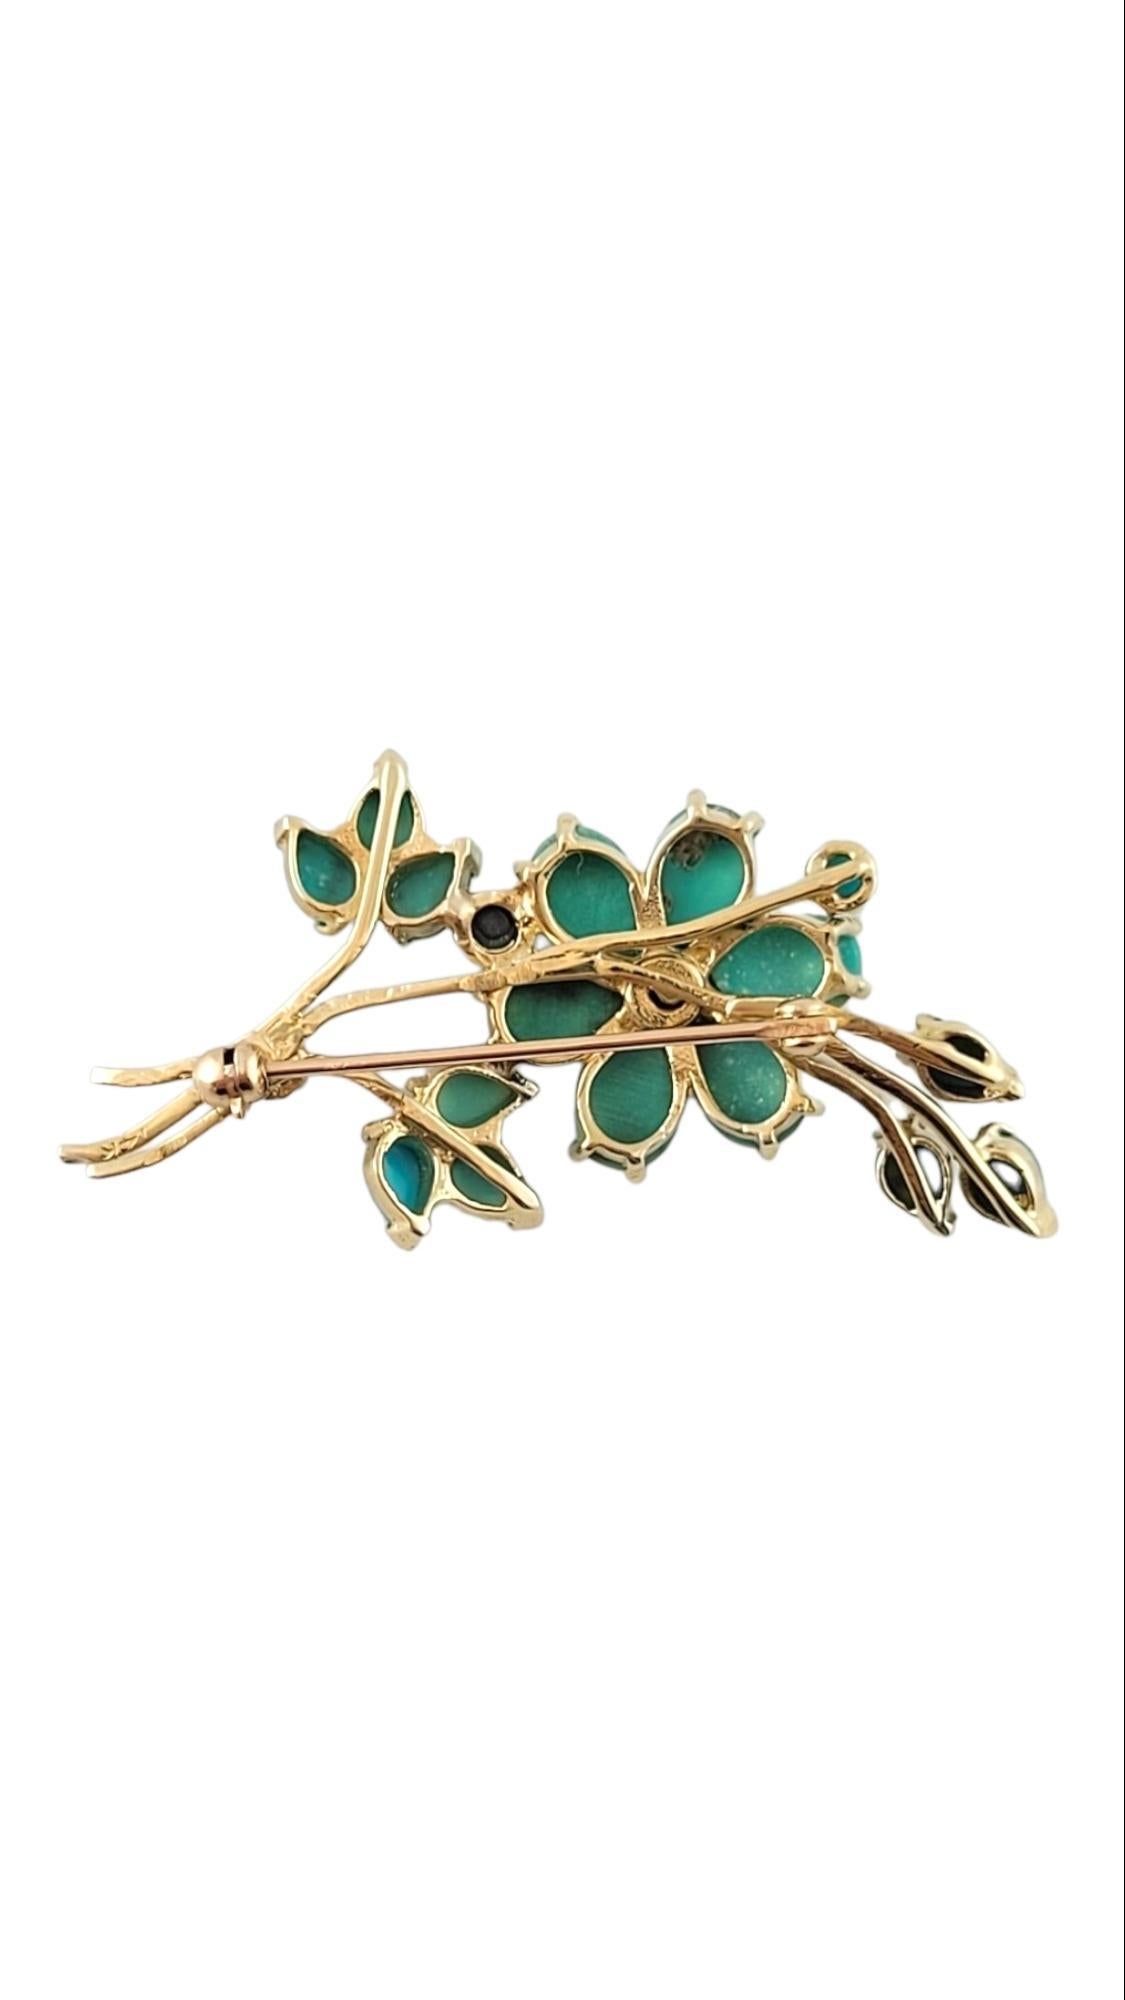 Oval Cut 14K Yellow Gold Flower Pin with Turquoise Stones #15186 For Sale